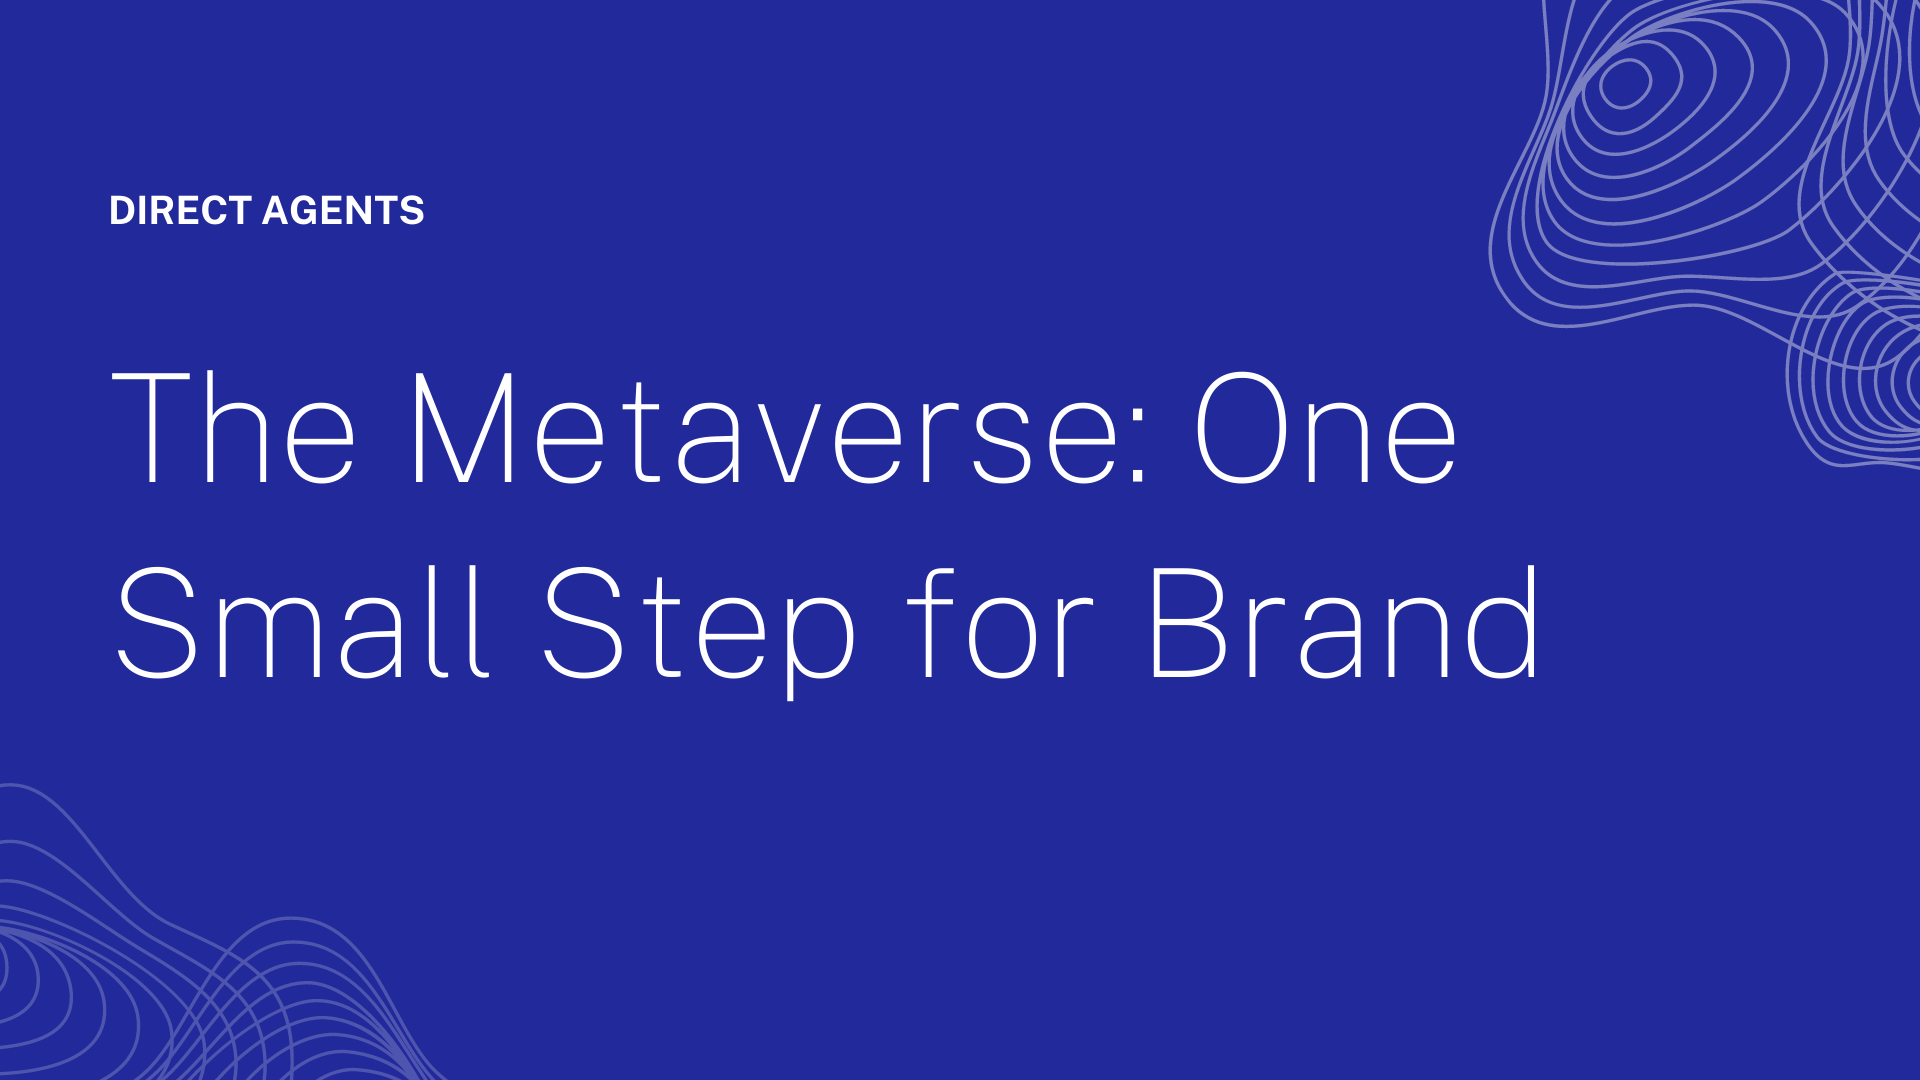 The Metaverse: One Small Step for Brand